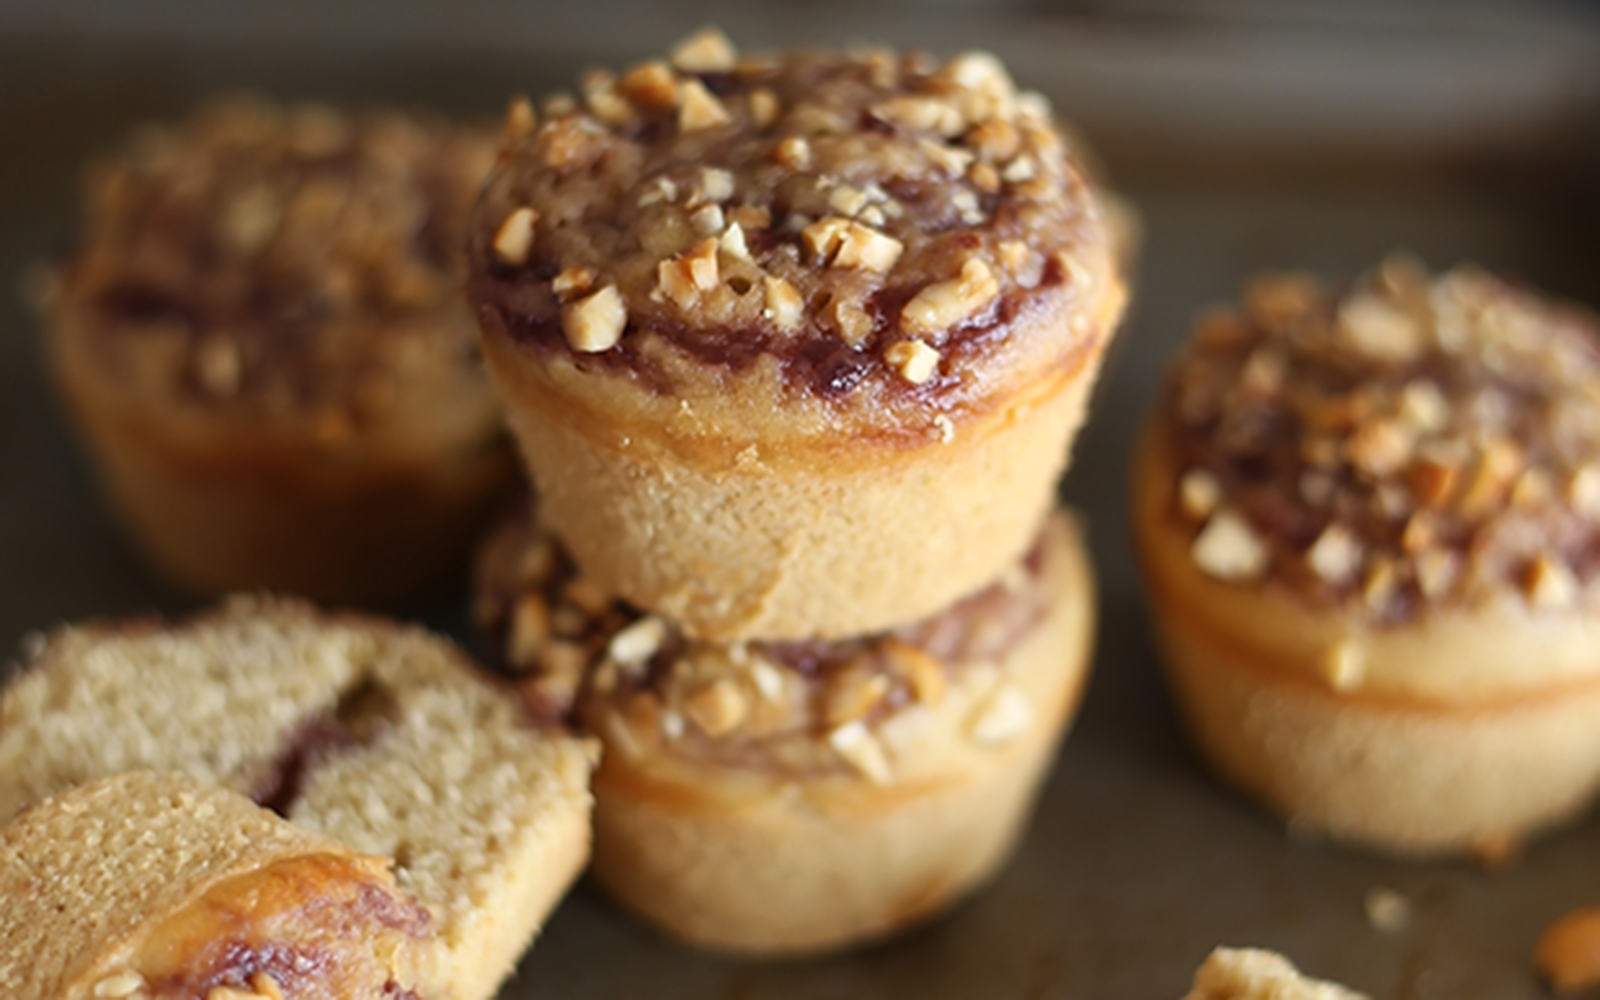 Vegan Peanut Butter and Jelly Muffins